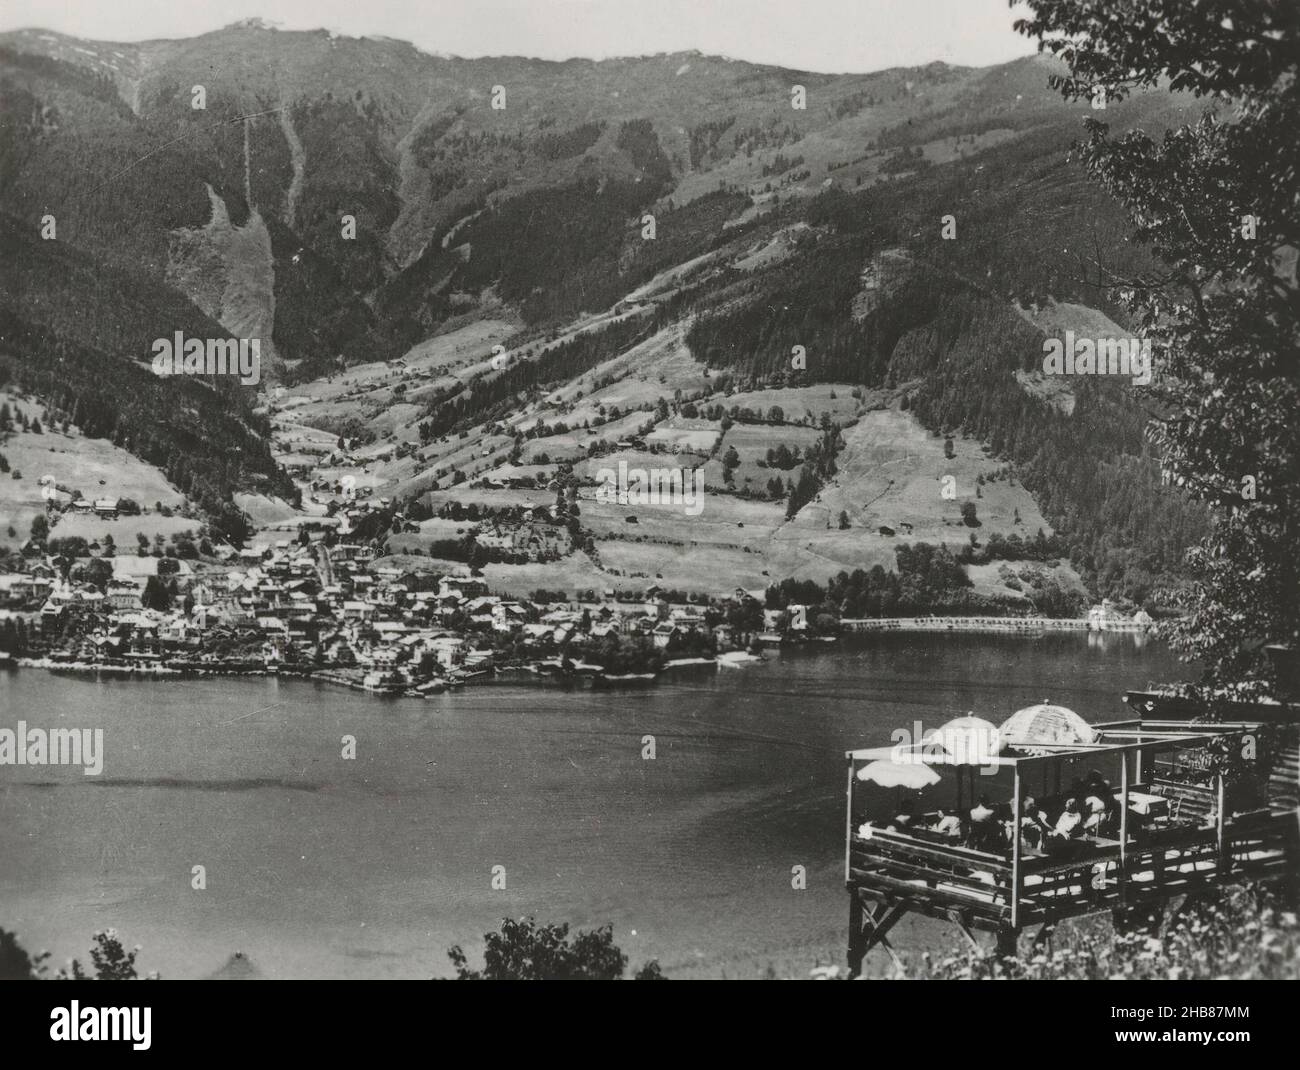 View of Zell am See, the Zeller See and the Schmittenhöhe, anonymous, publisher: C.J.S. (mentioned on object), Zell am See, publisher: Salzburg, c. 1950 - c. 1960, photographic support, gelatin silver print, height 62 mm × width 82 mm Stock Photo